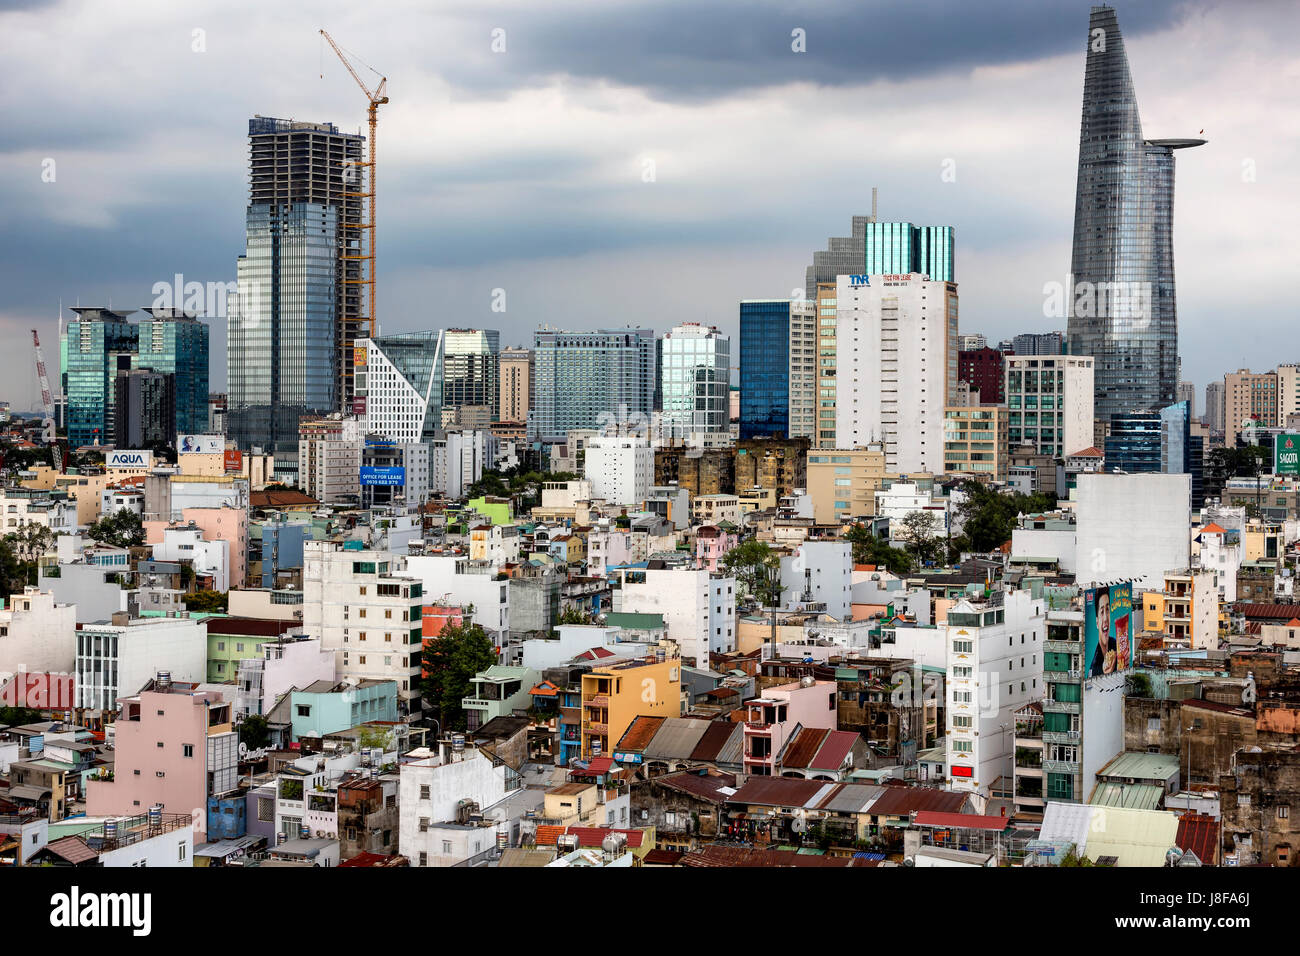 February 2017 - Ho Chi Minh City, Vietnam. View of the colorful rooftops and skyscrapers of Ho Chi Minh City. Stock Photo